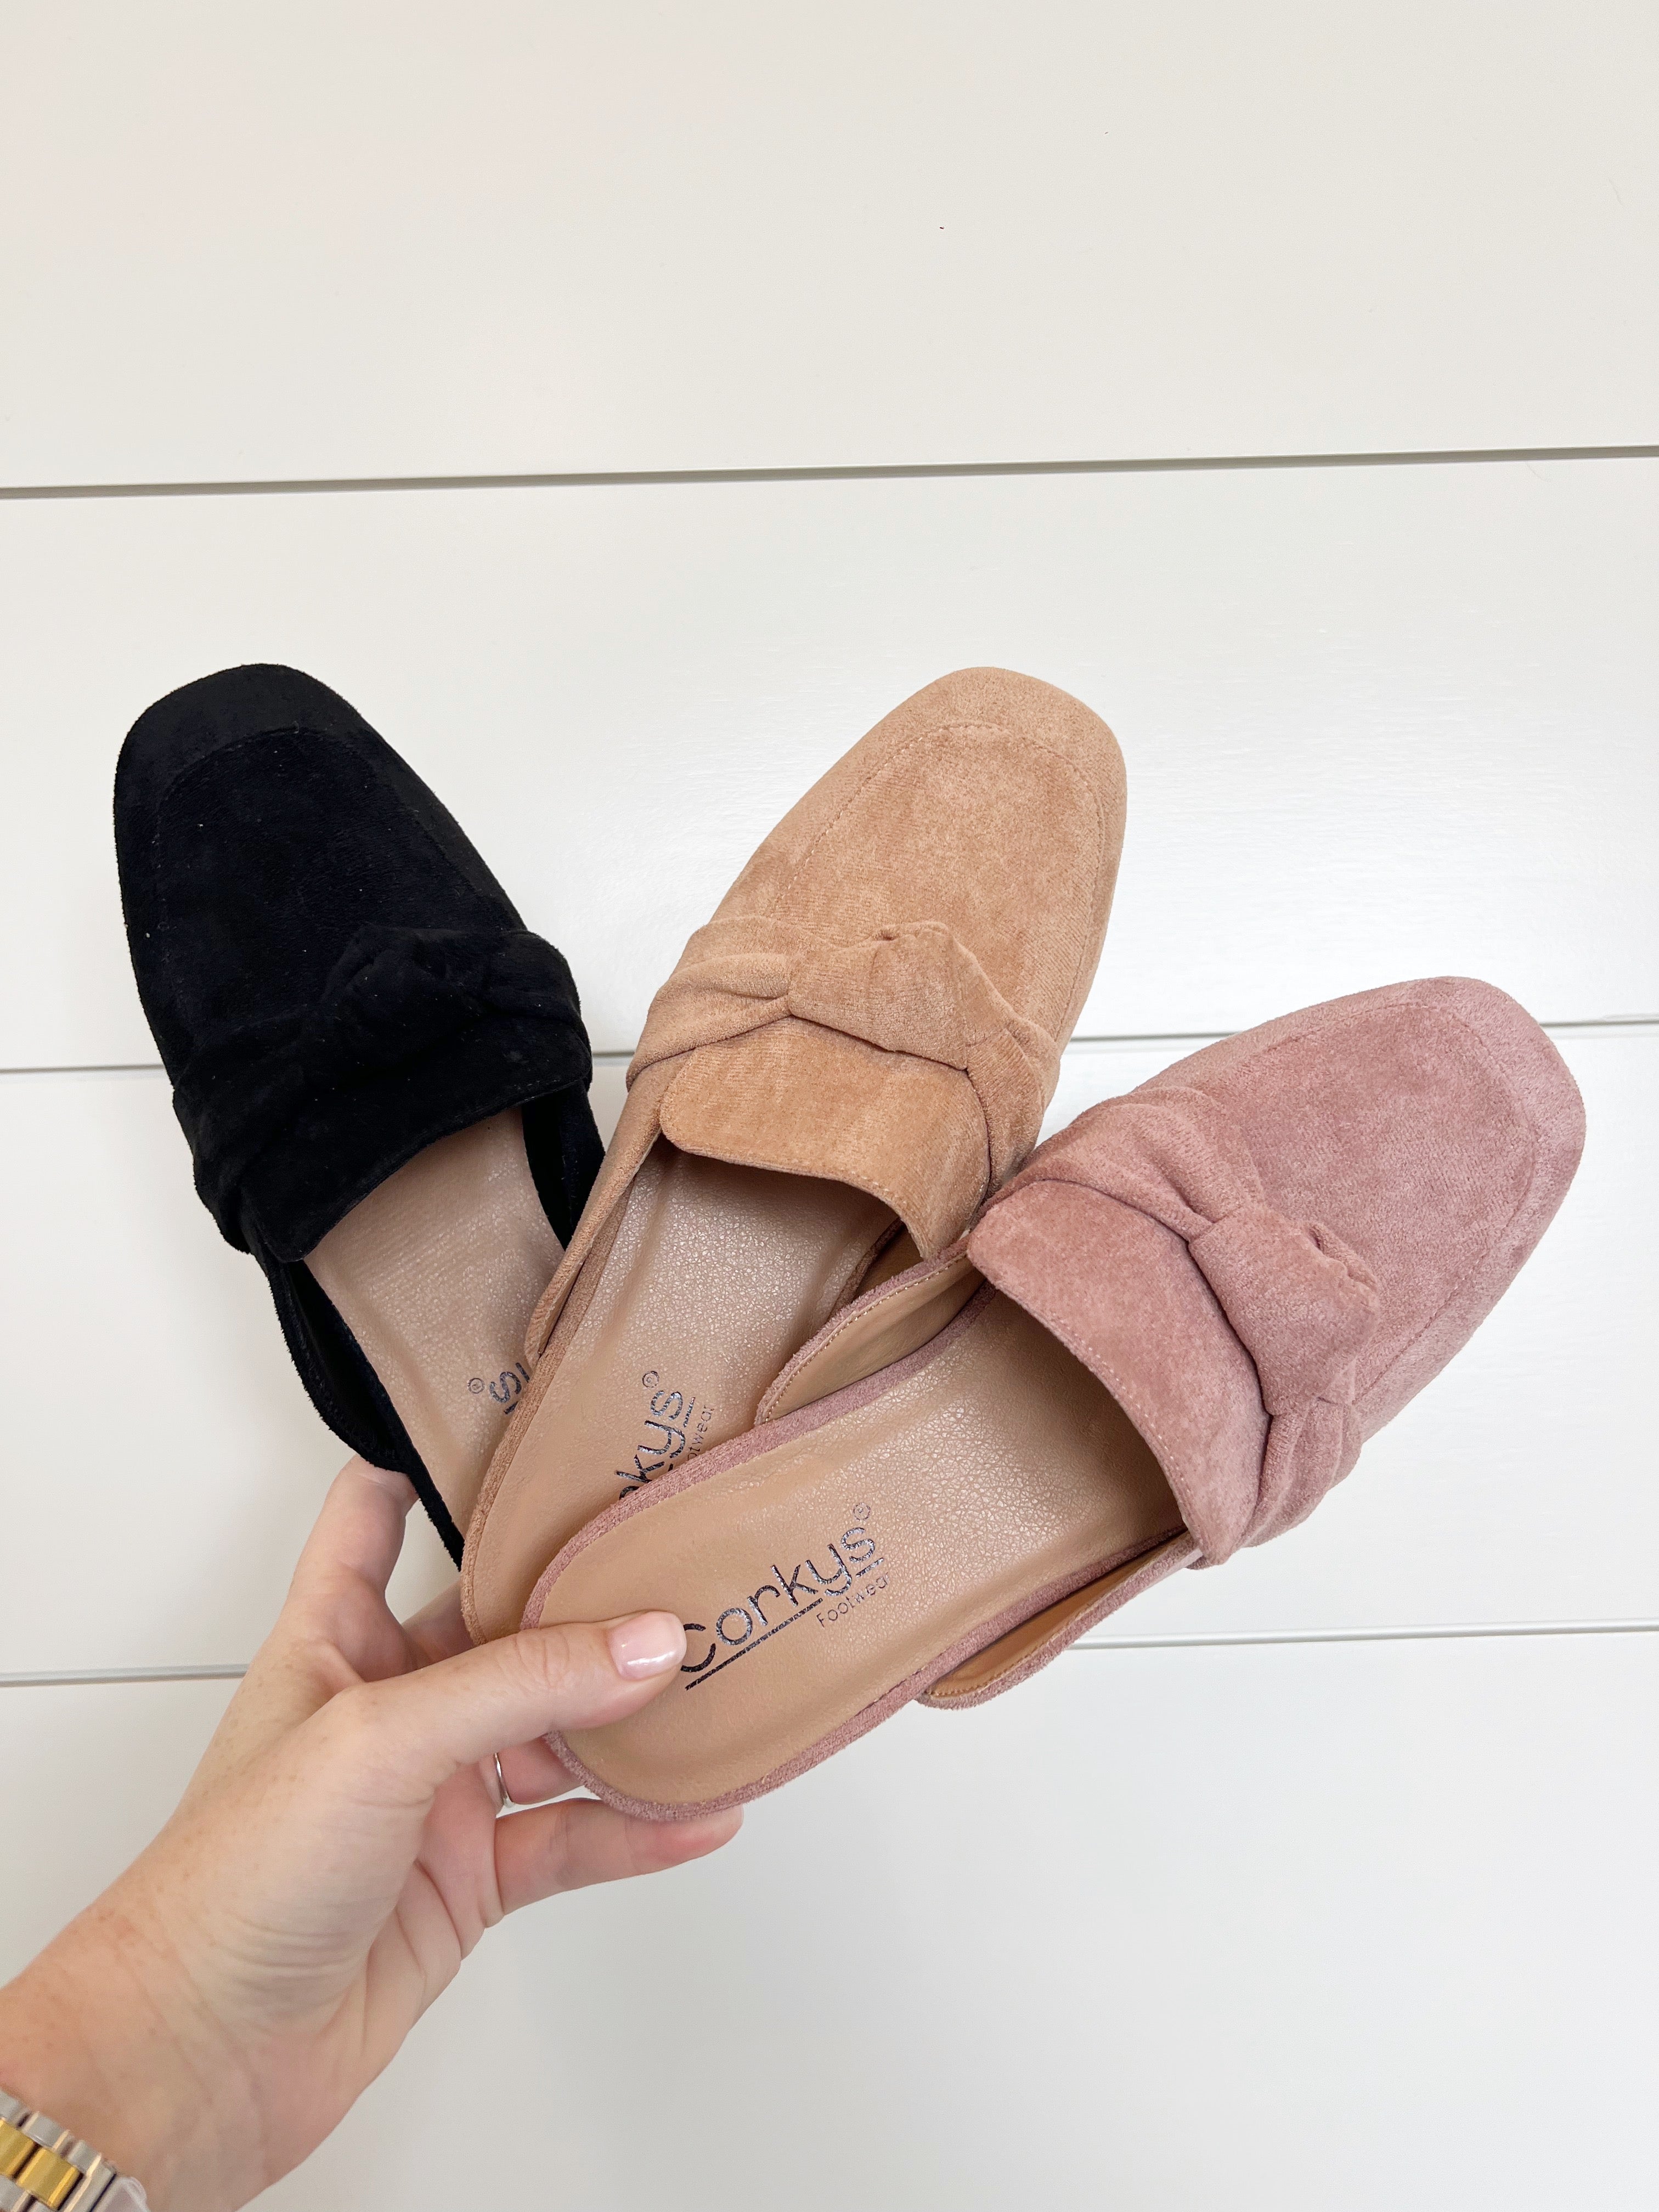 Market Live Preorder: Clingy Slip-On Shoe by Corky’s (Ships Late June)